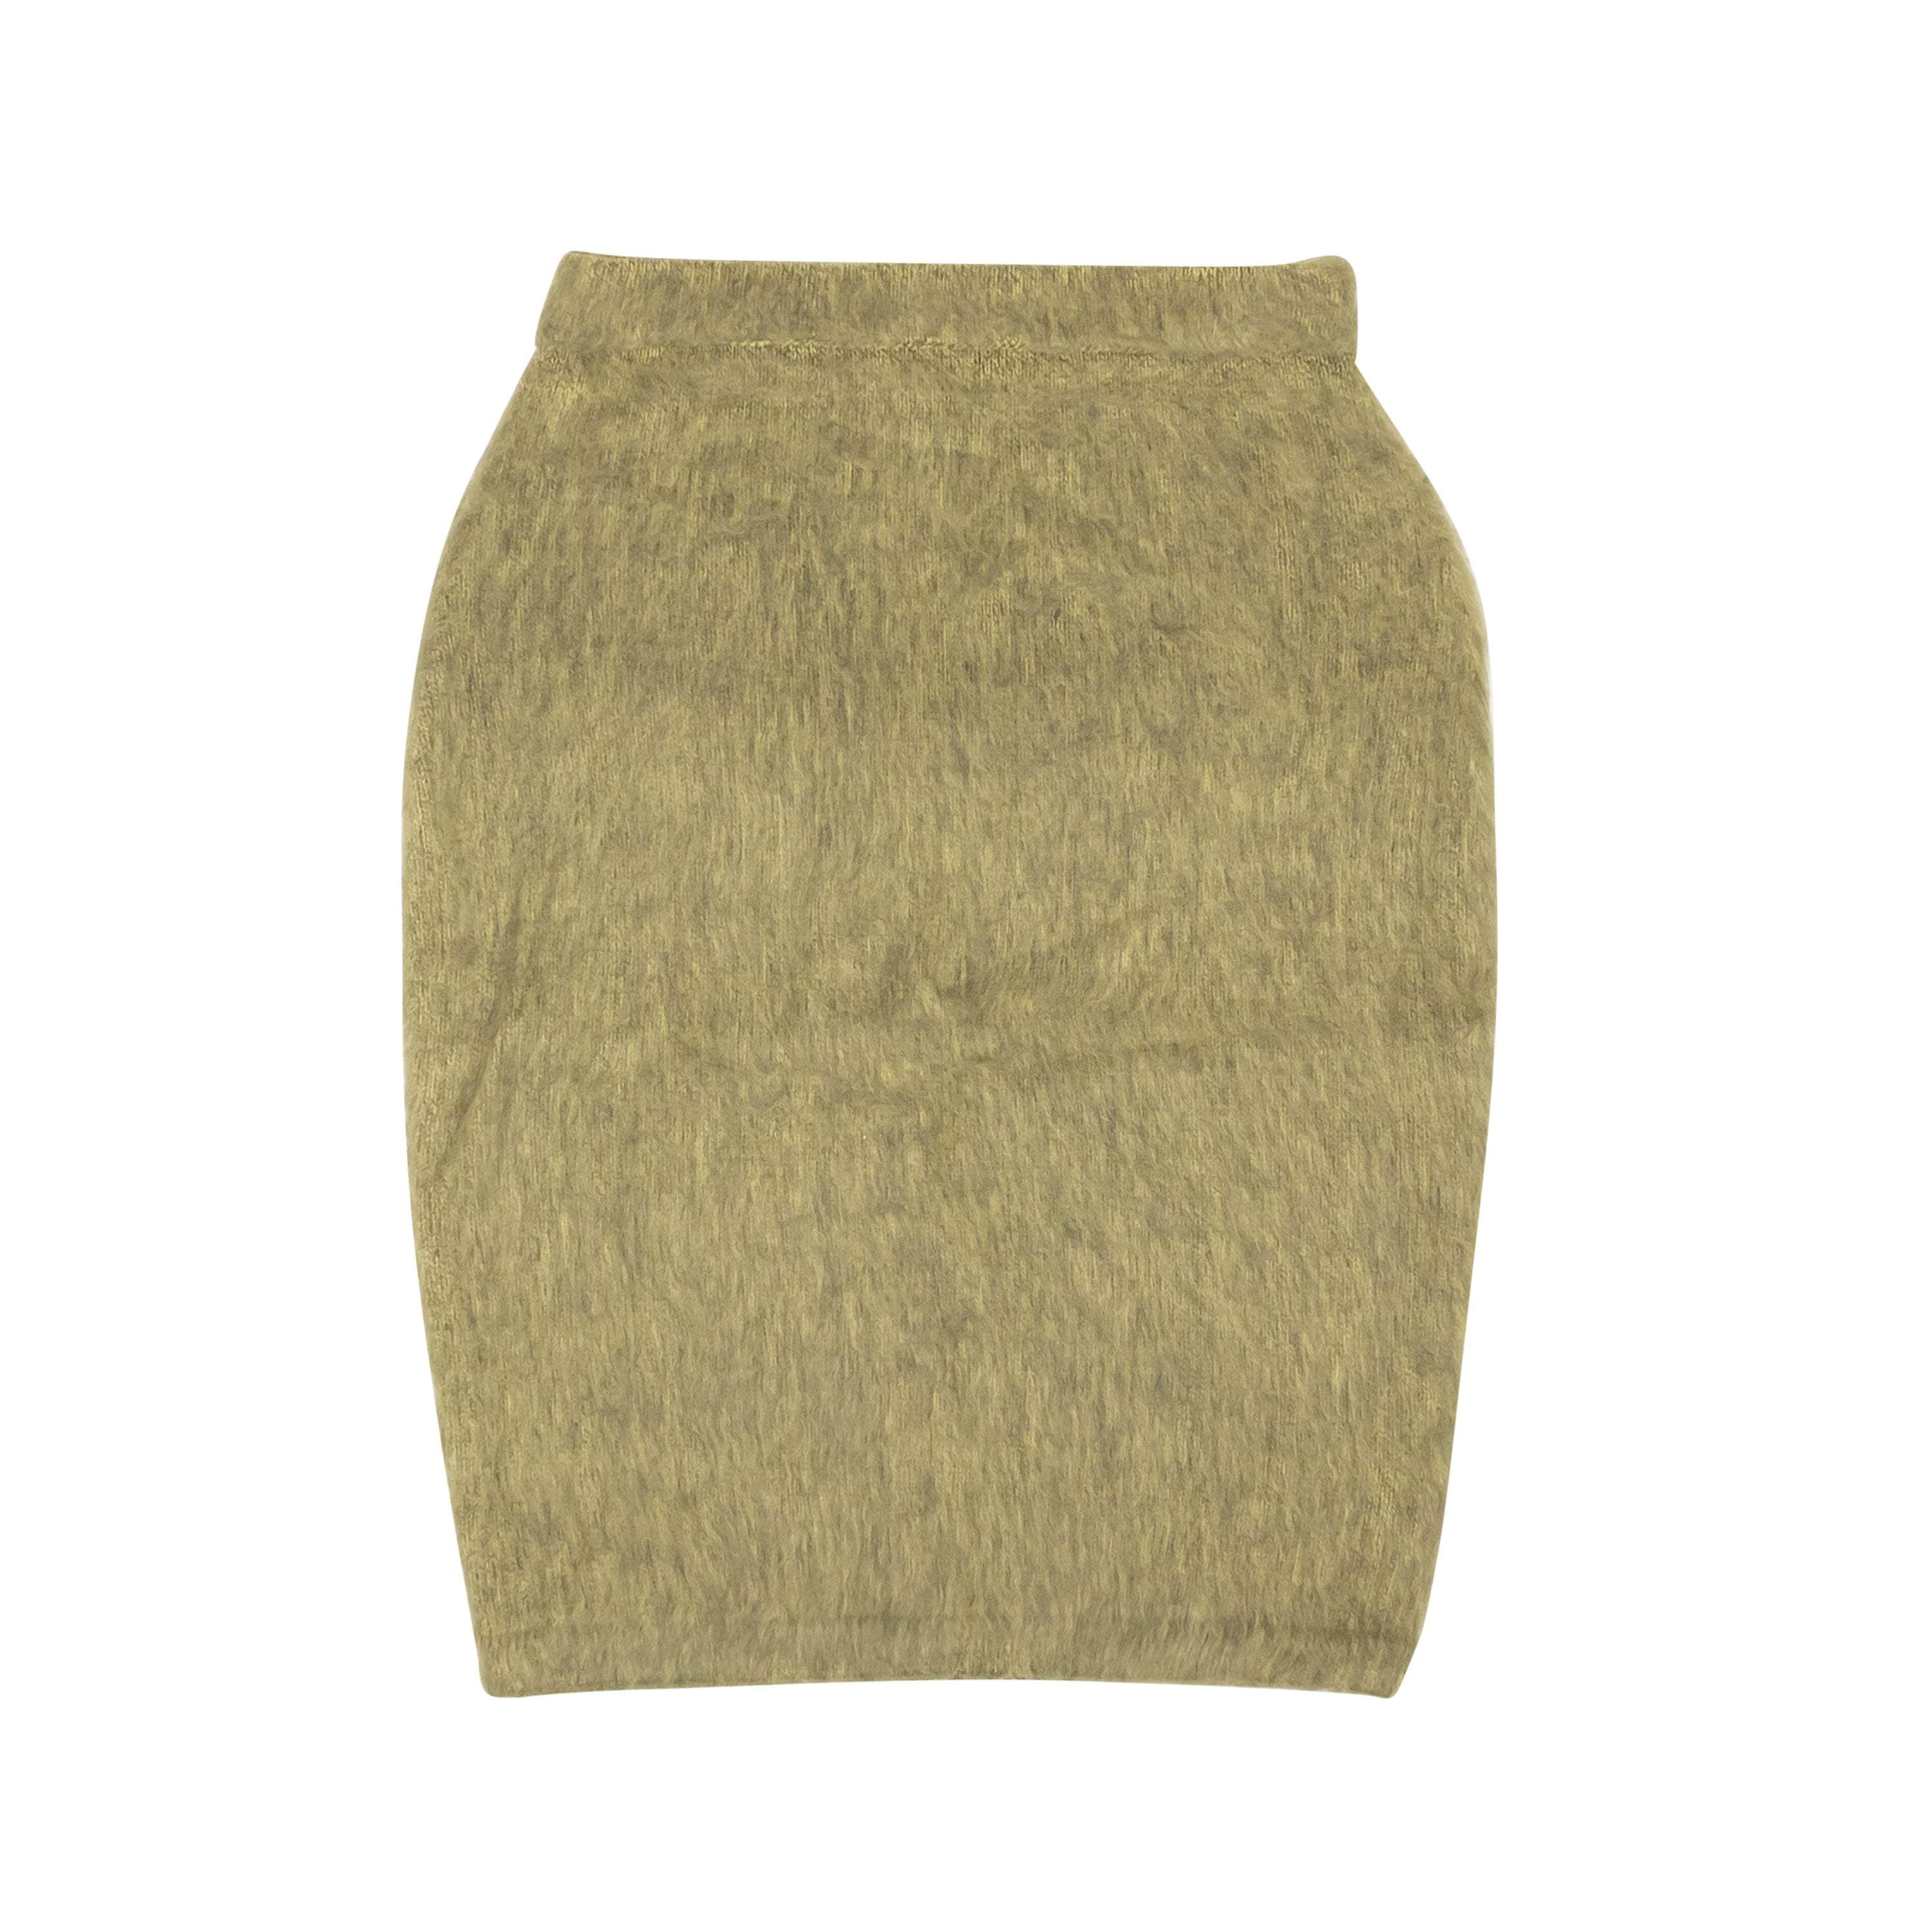 Stussy channelenable-all, chicmi, couponcollection, gender-womens, main-clothing, size-m, size-s, size-xs, stussy, under-250, womens-flared-skirts Sand Tan Acrylic Marsh Midi Skirt